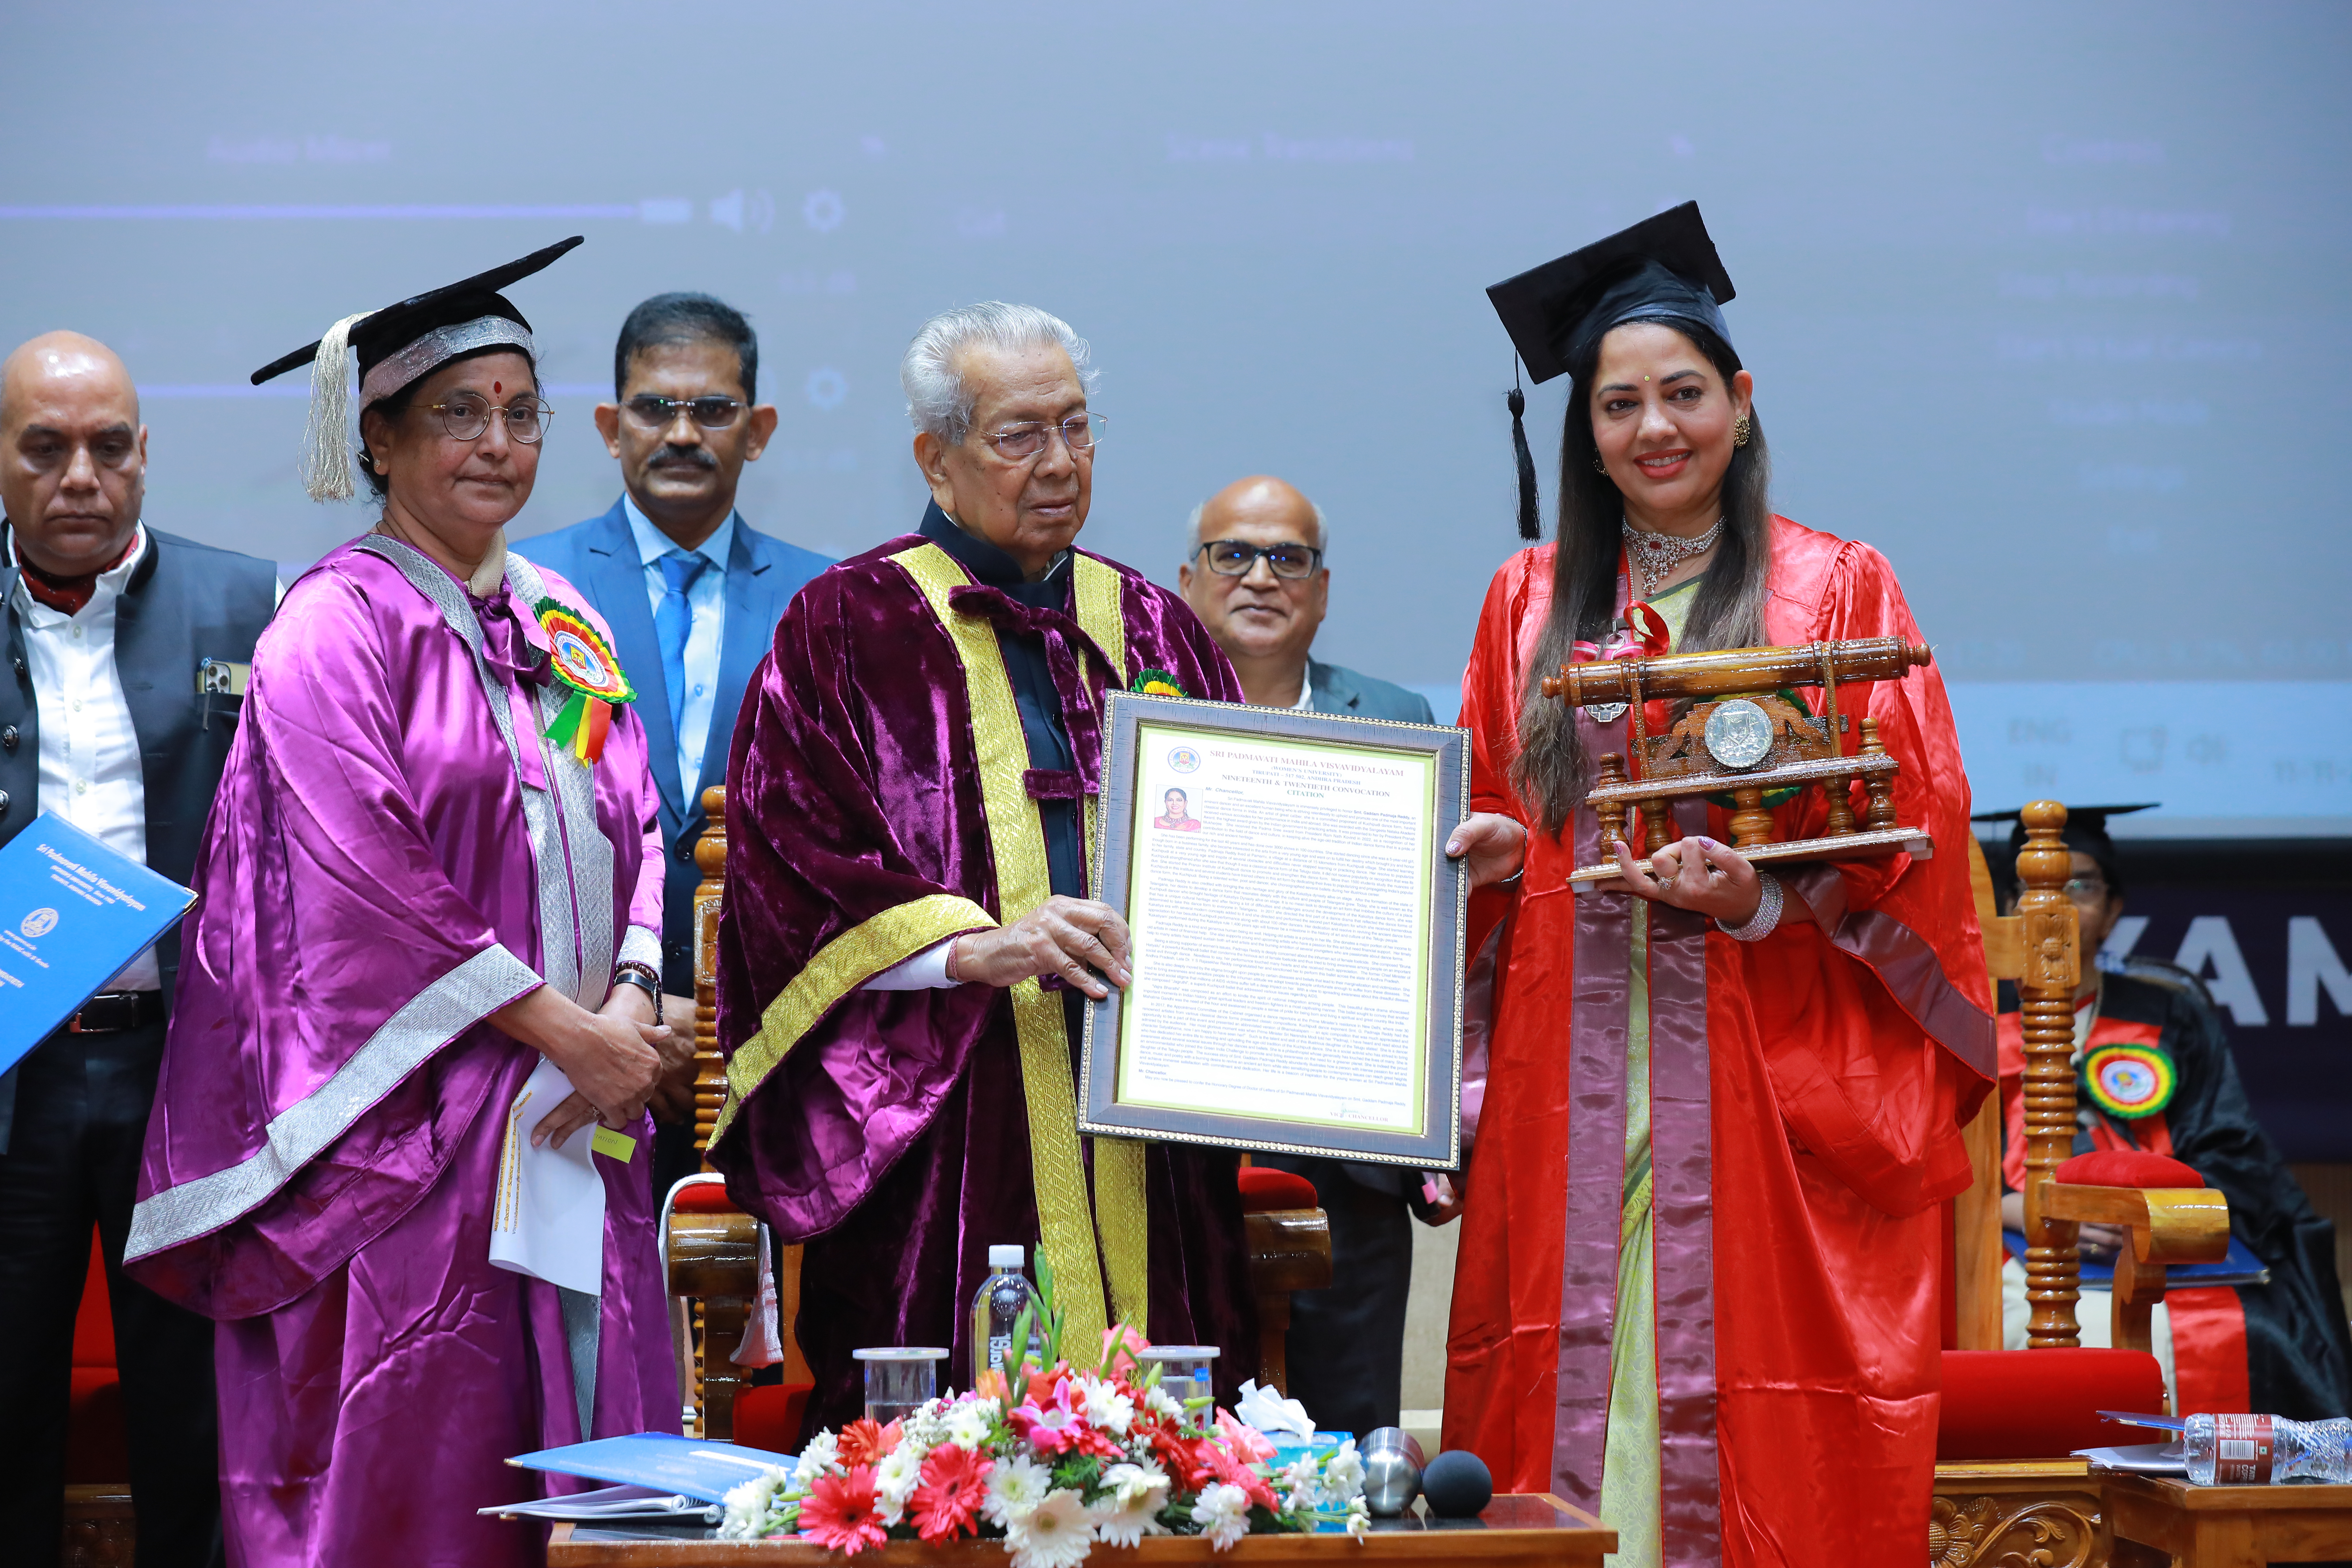 19th & 20th Convocation held on 11-11-2022